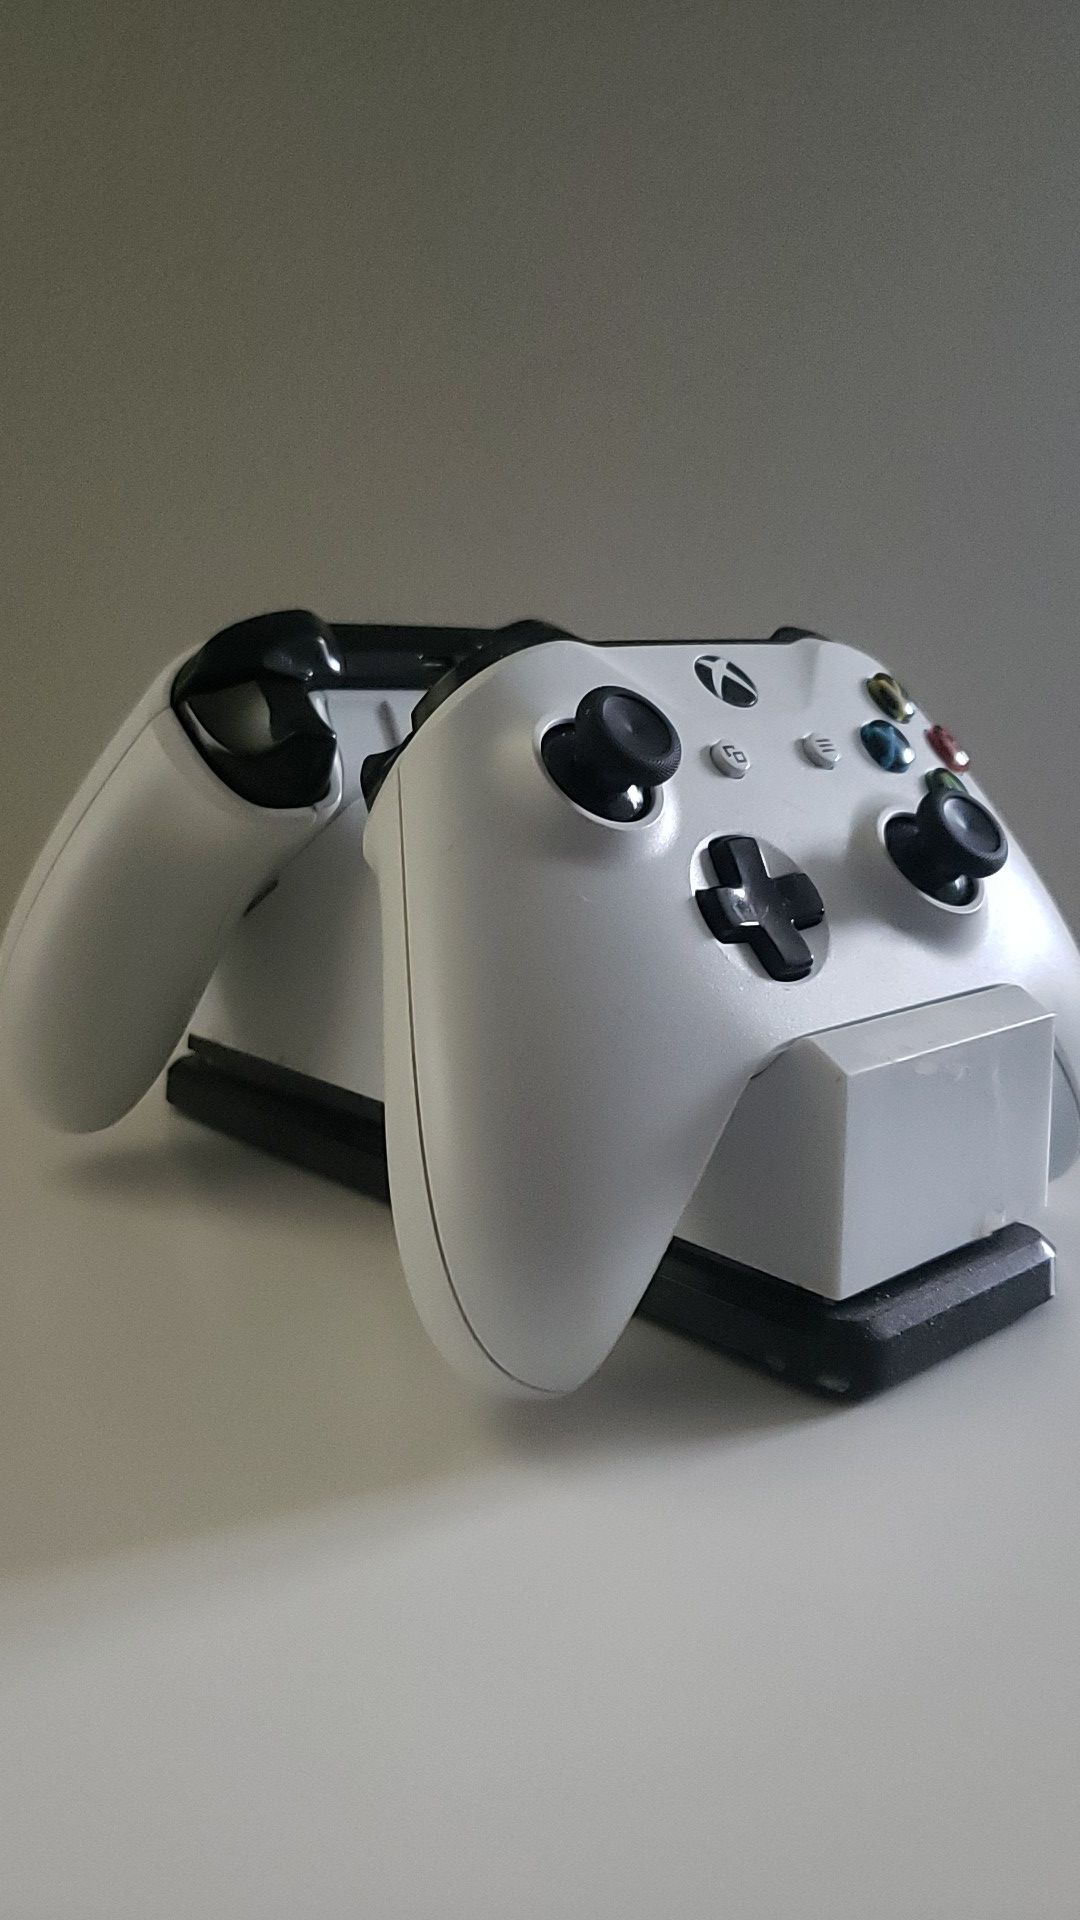 2 Wireless Xbox One controllers with charging station